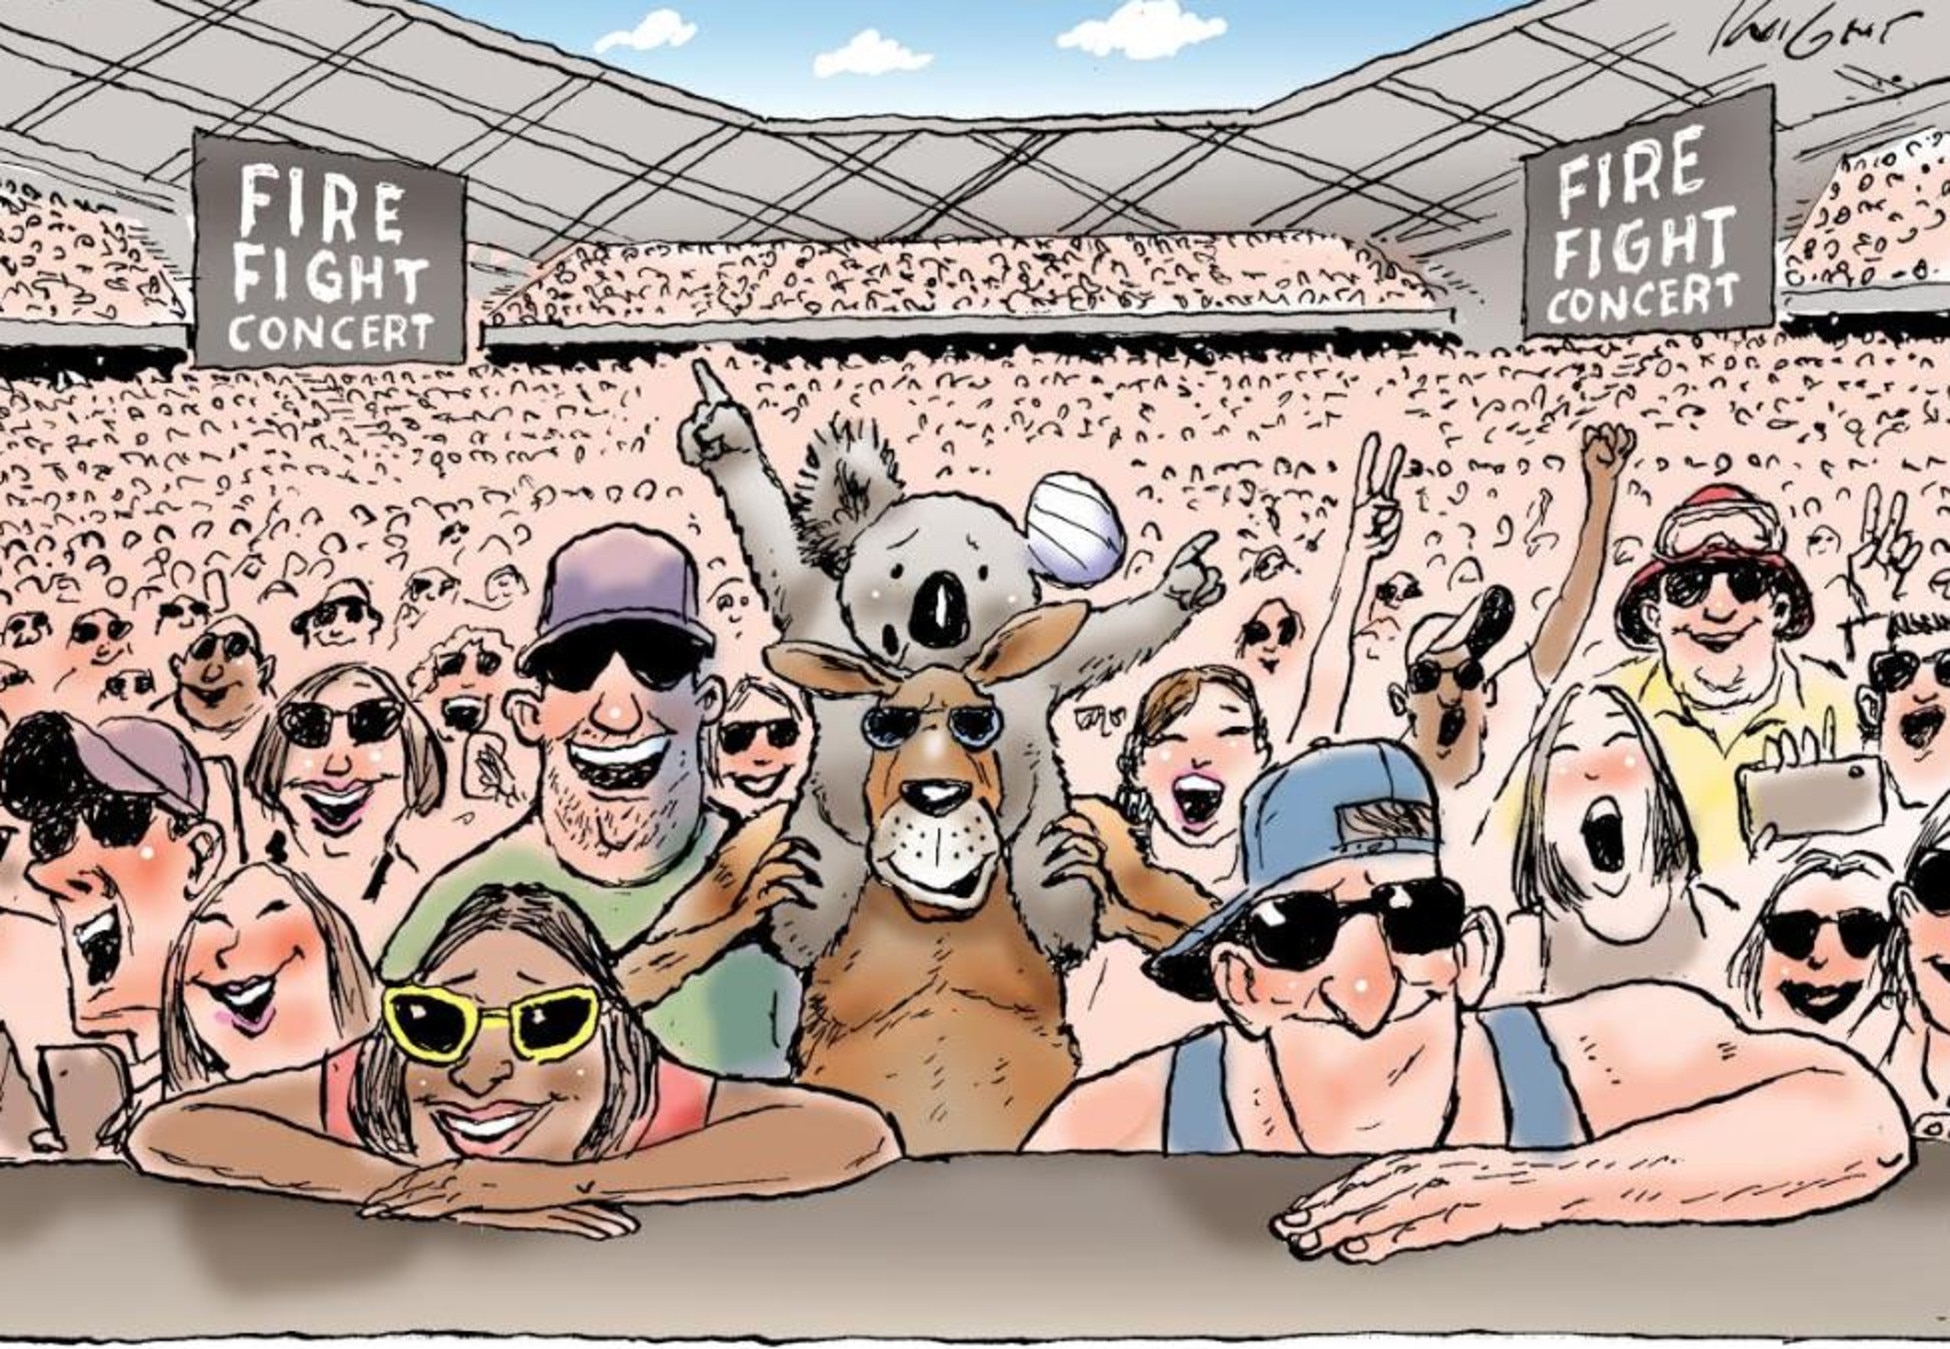 Mark Knight's cartoon about the Fire Fight Concert.